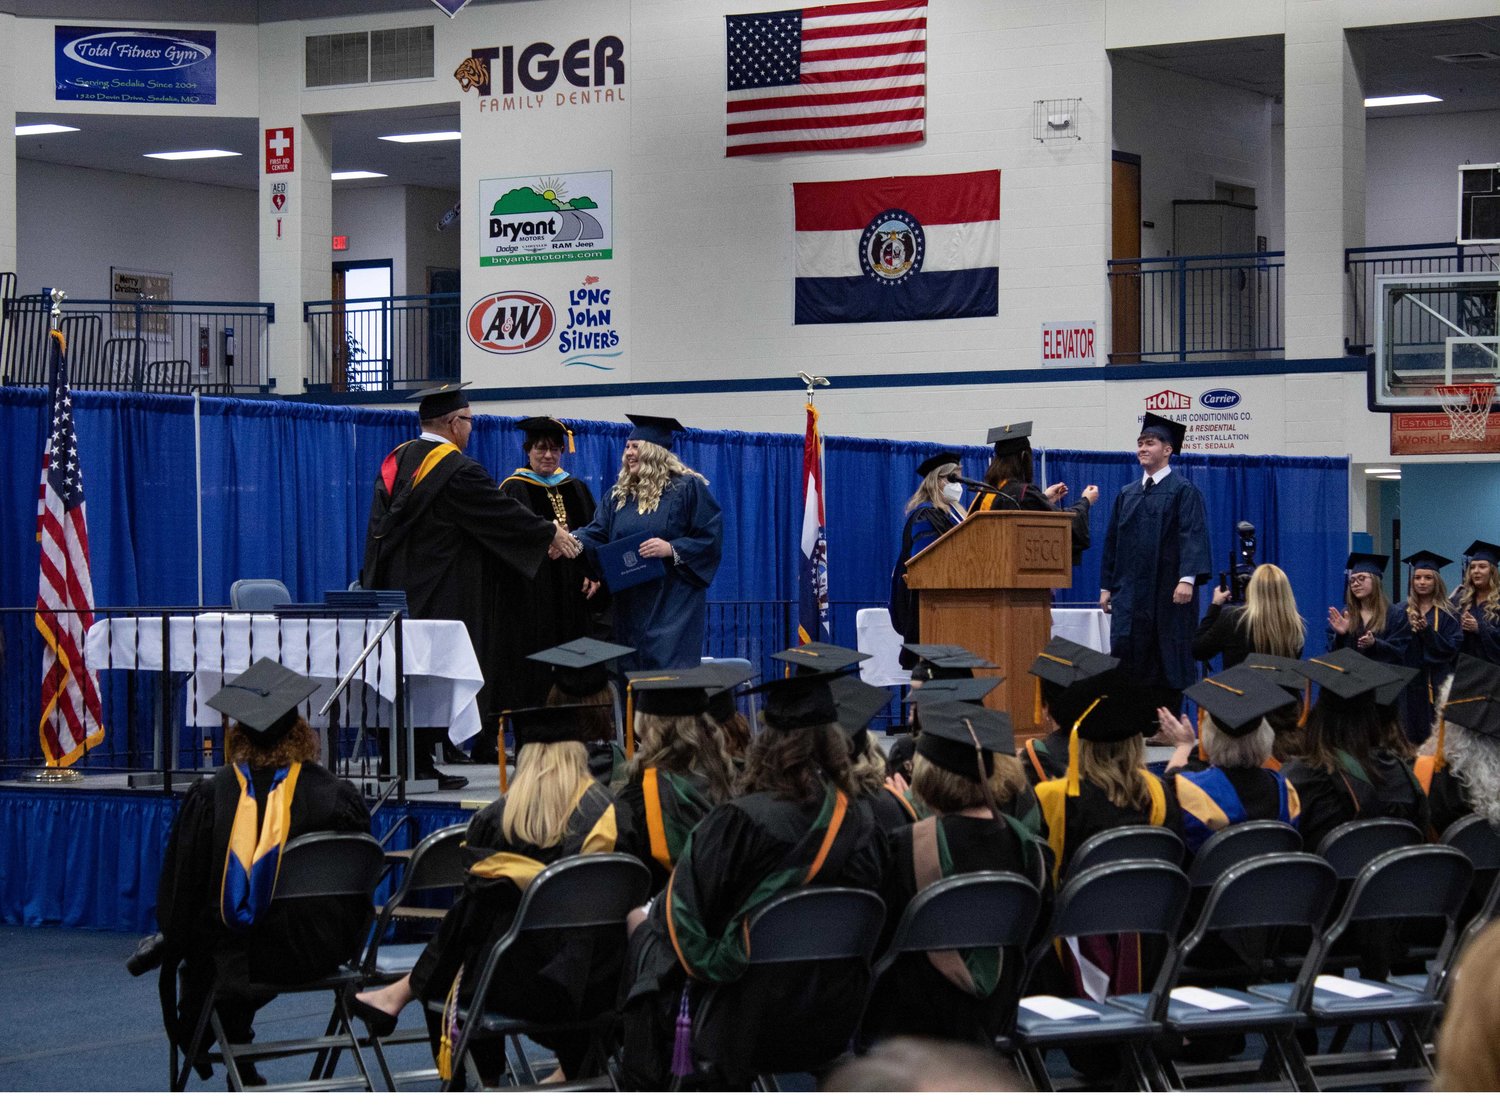 From left, Board of Trustee member Tim Carr and SFCC President Dr. Joanna Anderson congratulate and present diplomas to students while Dean Dr. Rhonda Hutton Gann and nursing faculty perform the pinning ceremony on the right.